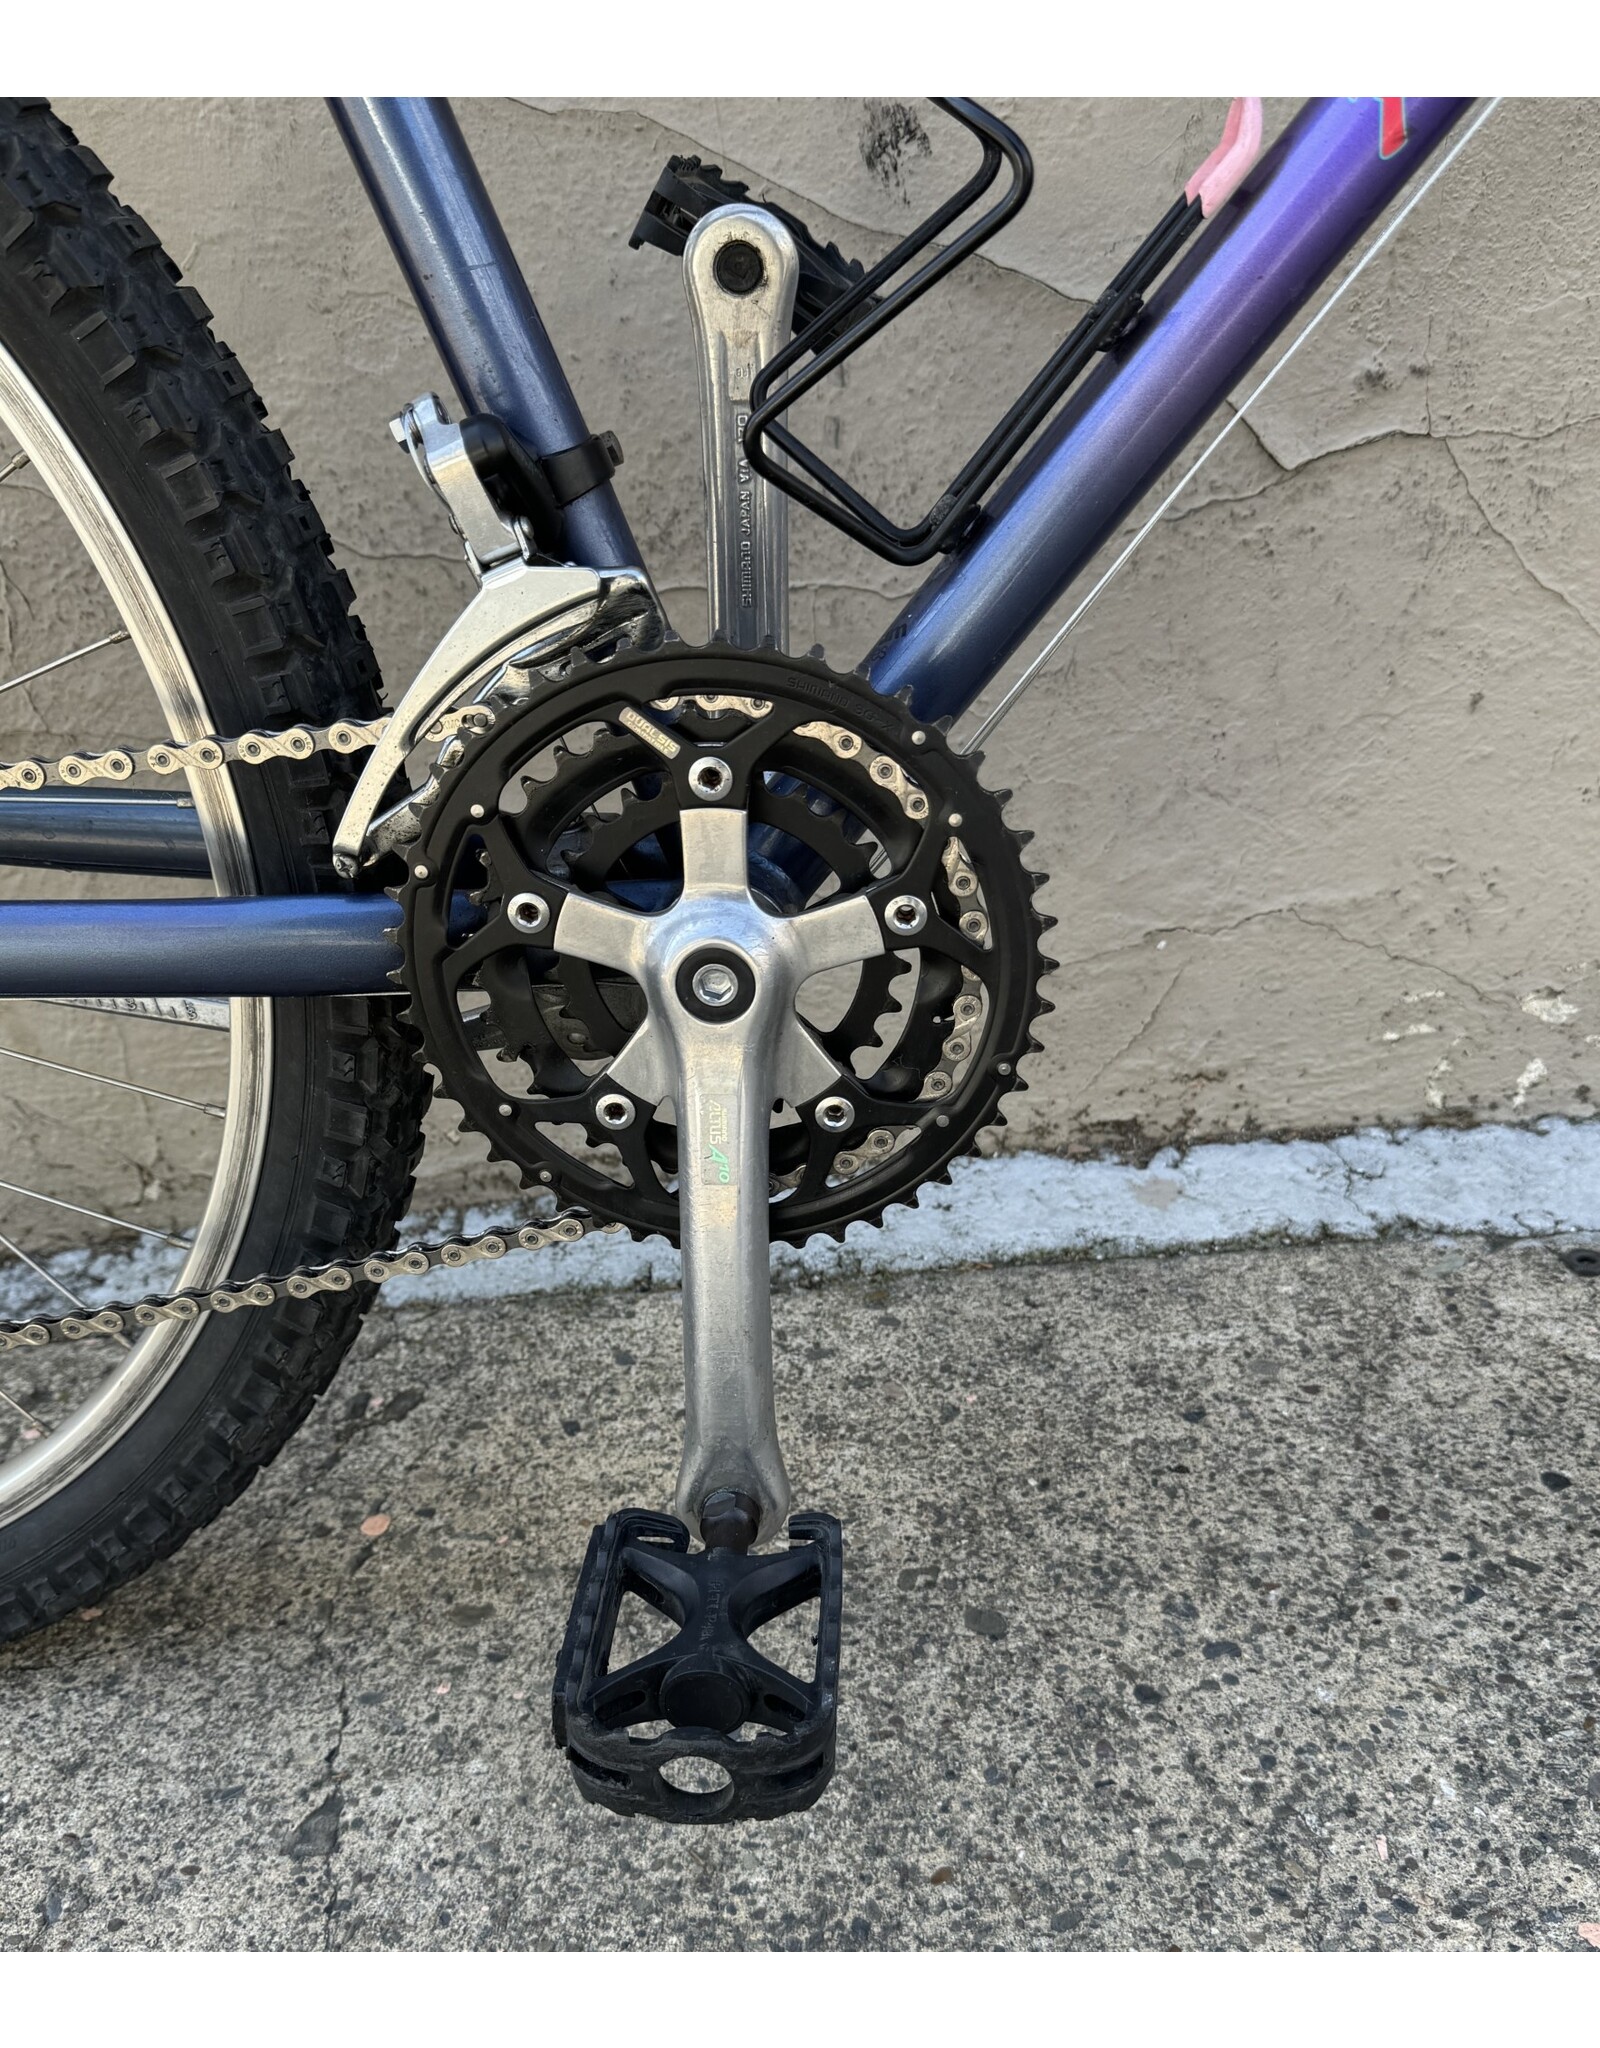 Specialized Specialized Rockhopper, 17 Inches, Purple